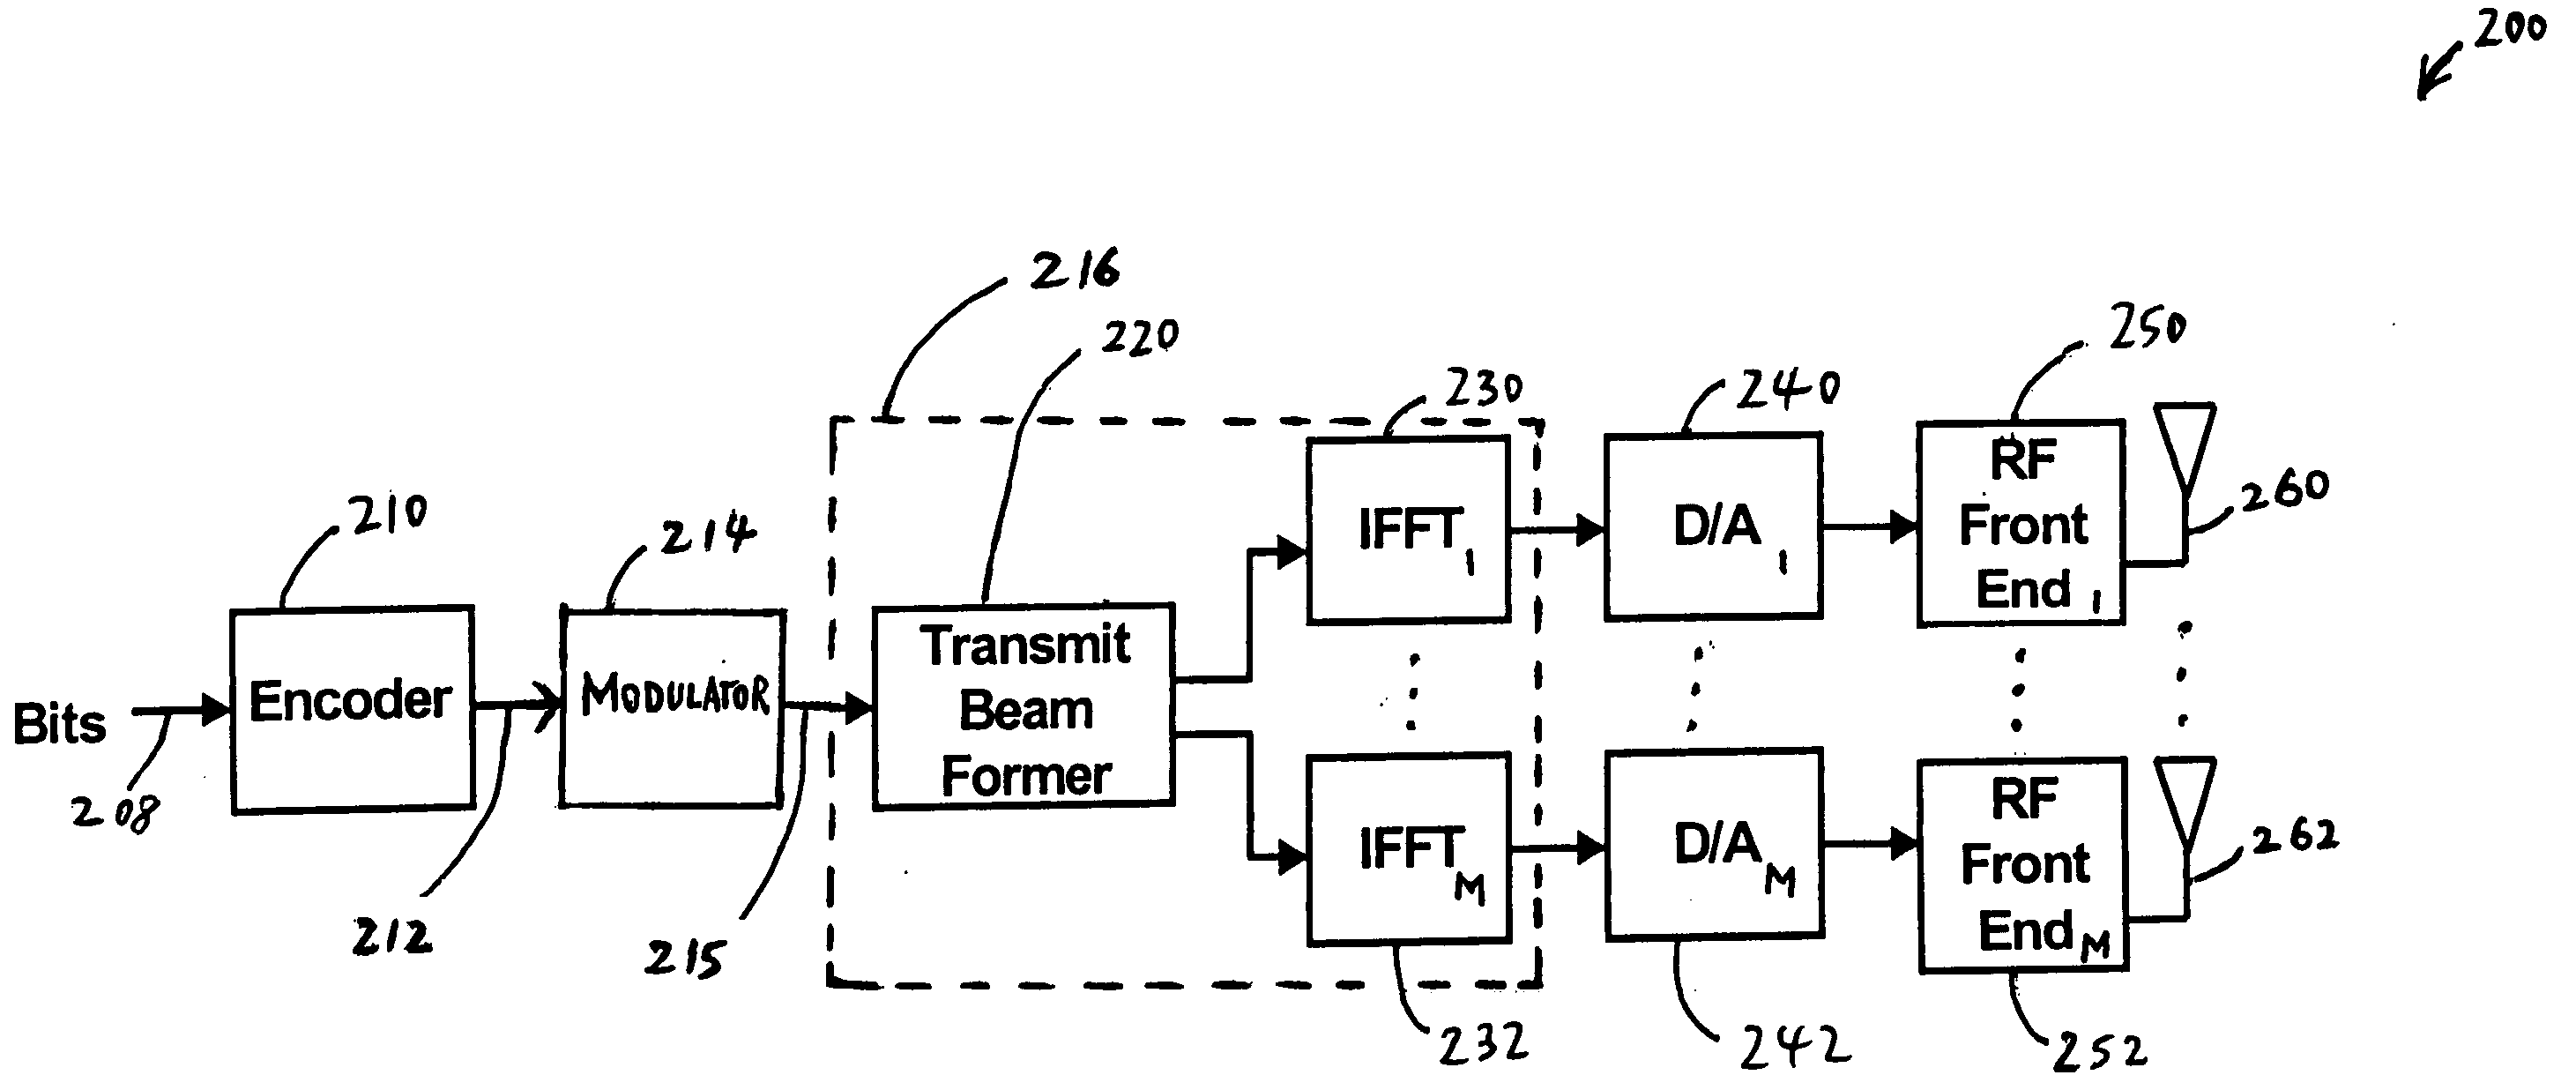 Apparatus and method of multiple antenna transmitter beamforming of high data rate wideband packetized wireless communication signals